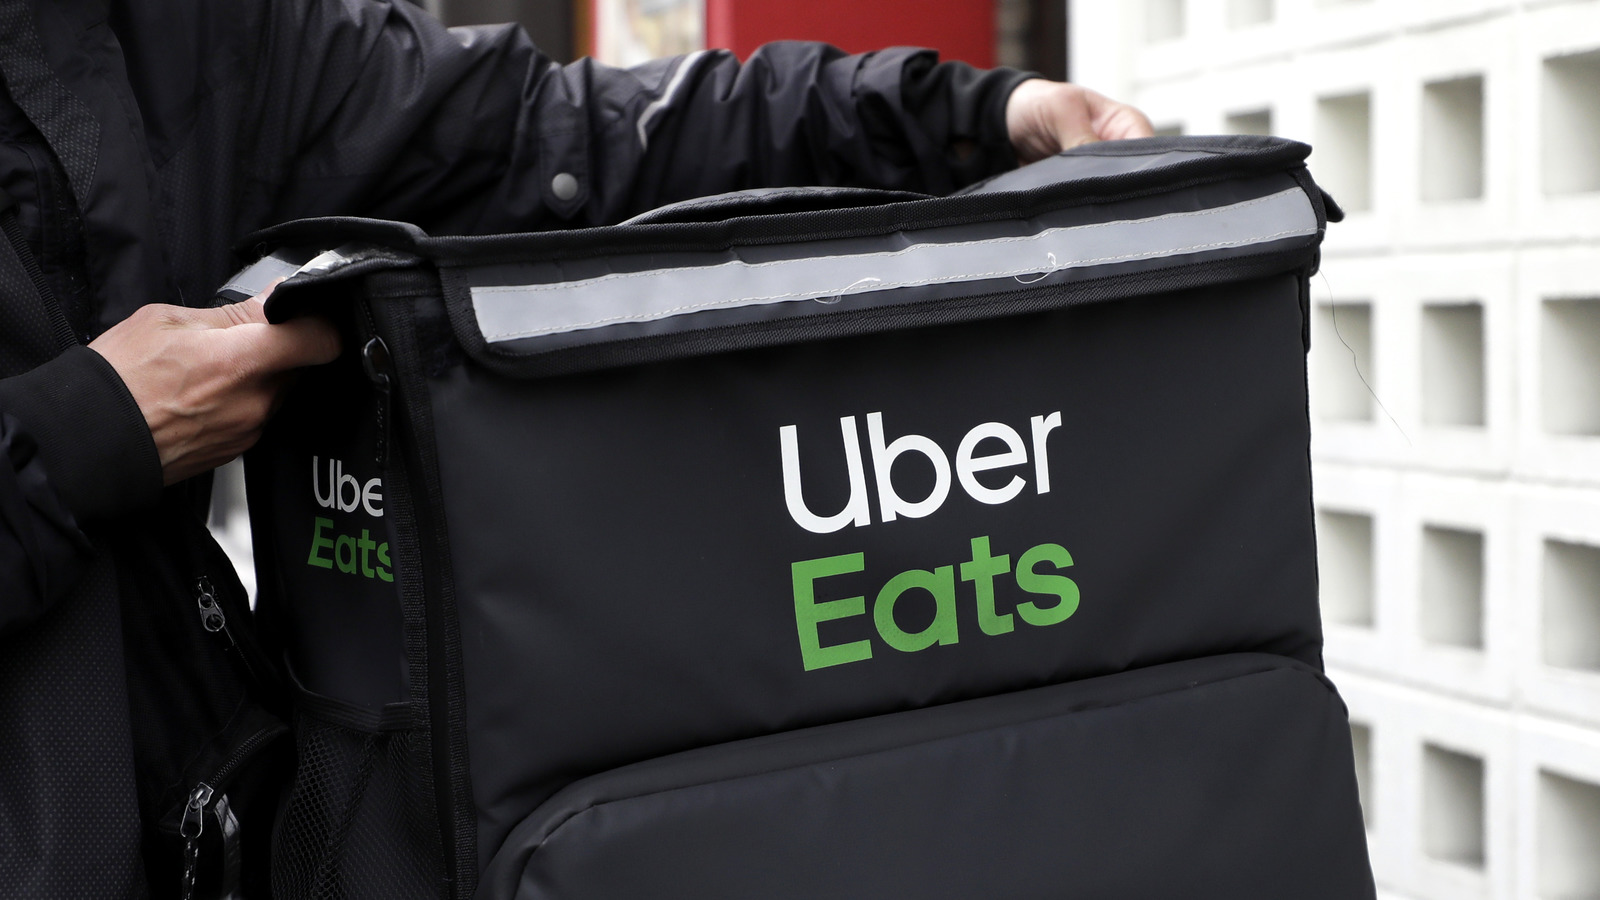 This LongAwaited Reunion Will Happen For Uber Eats Super Bowl Ad